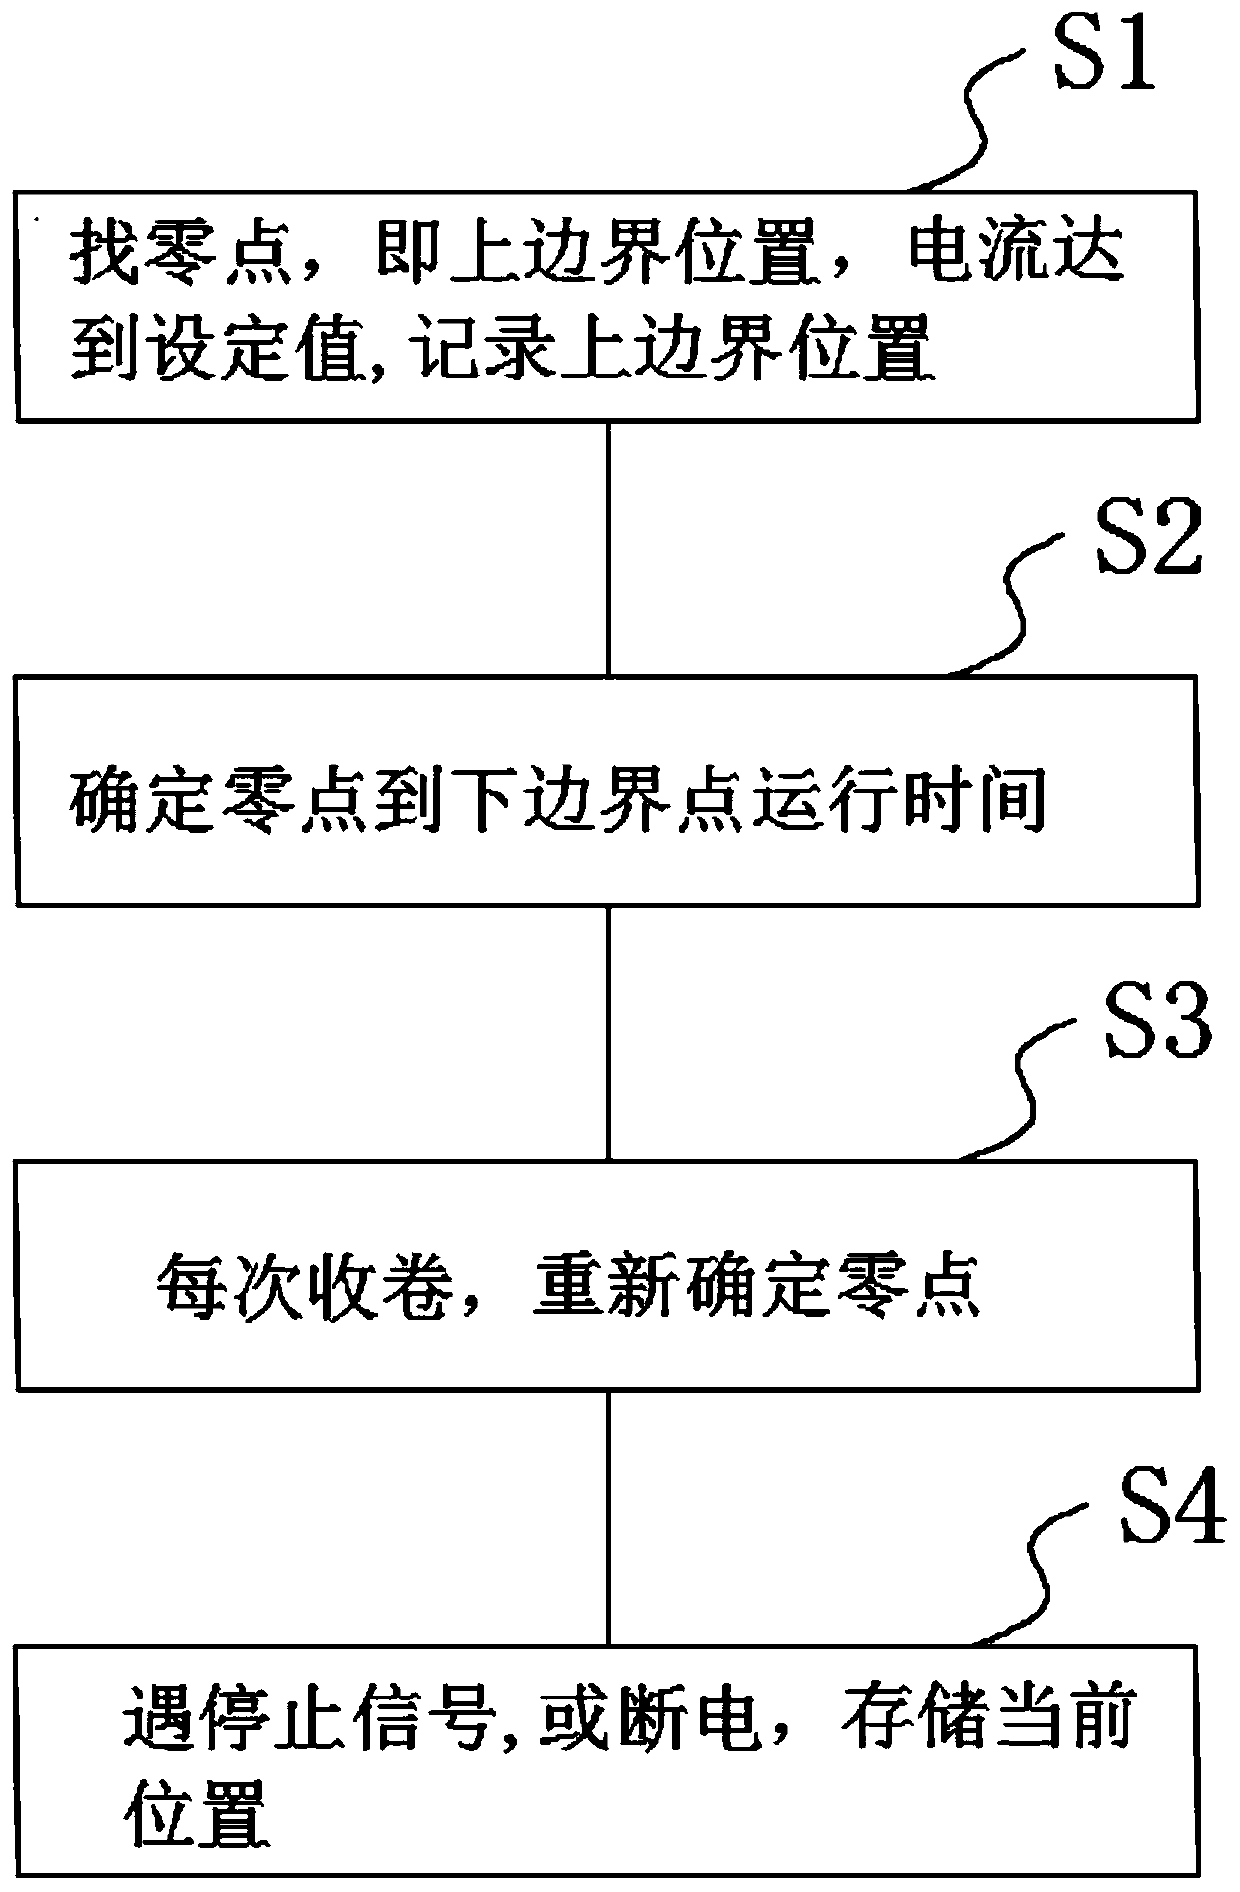 Curtain control method and control mechanism